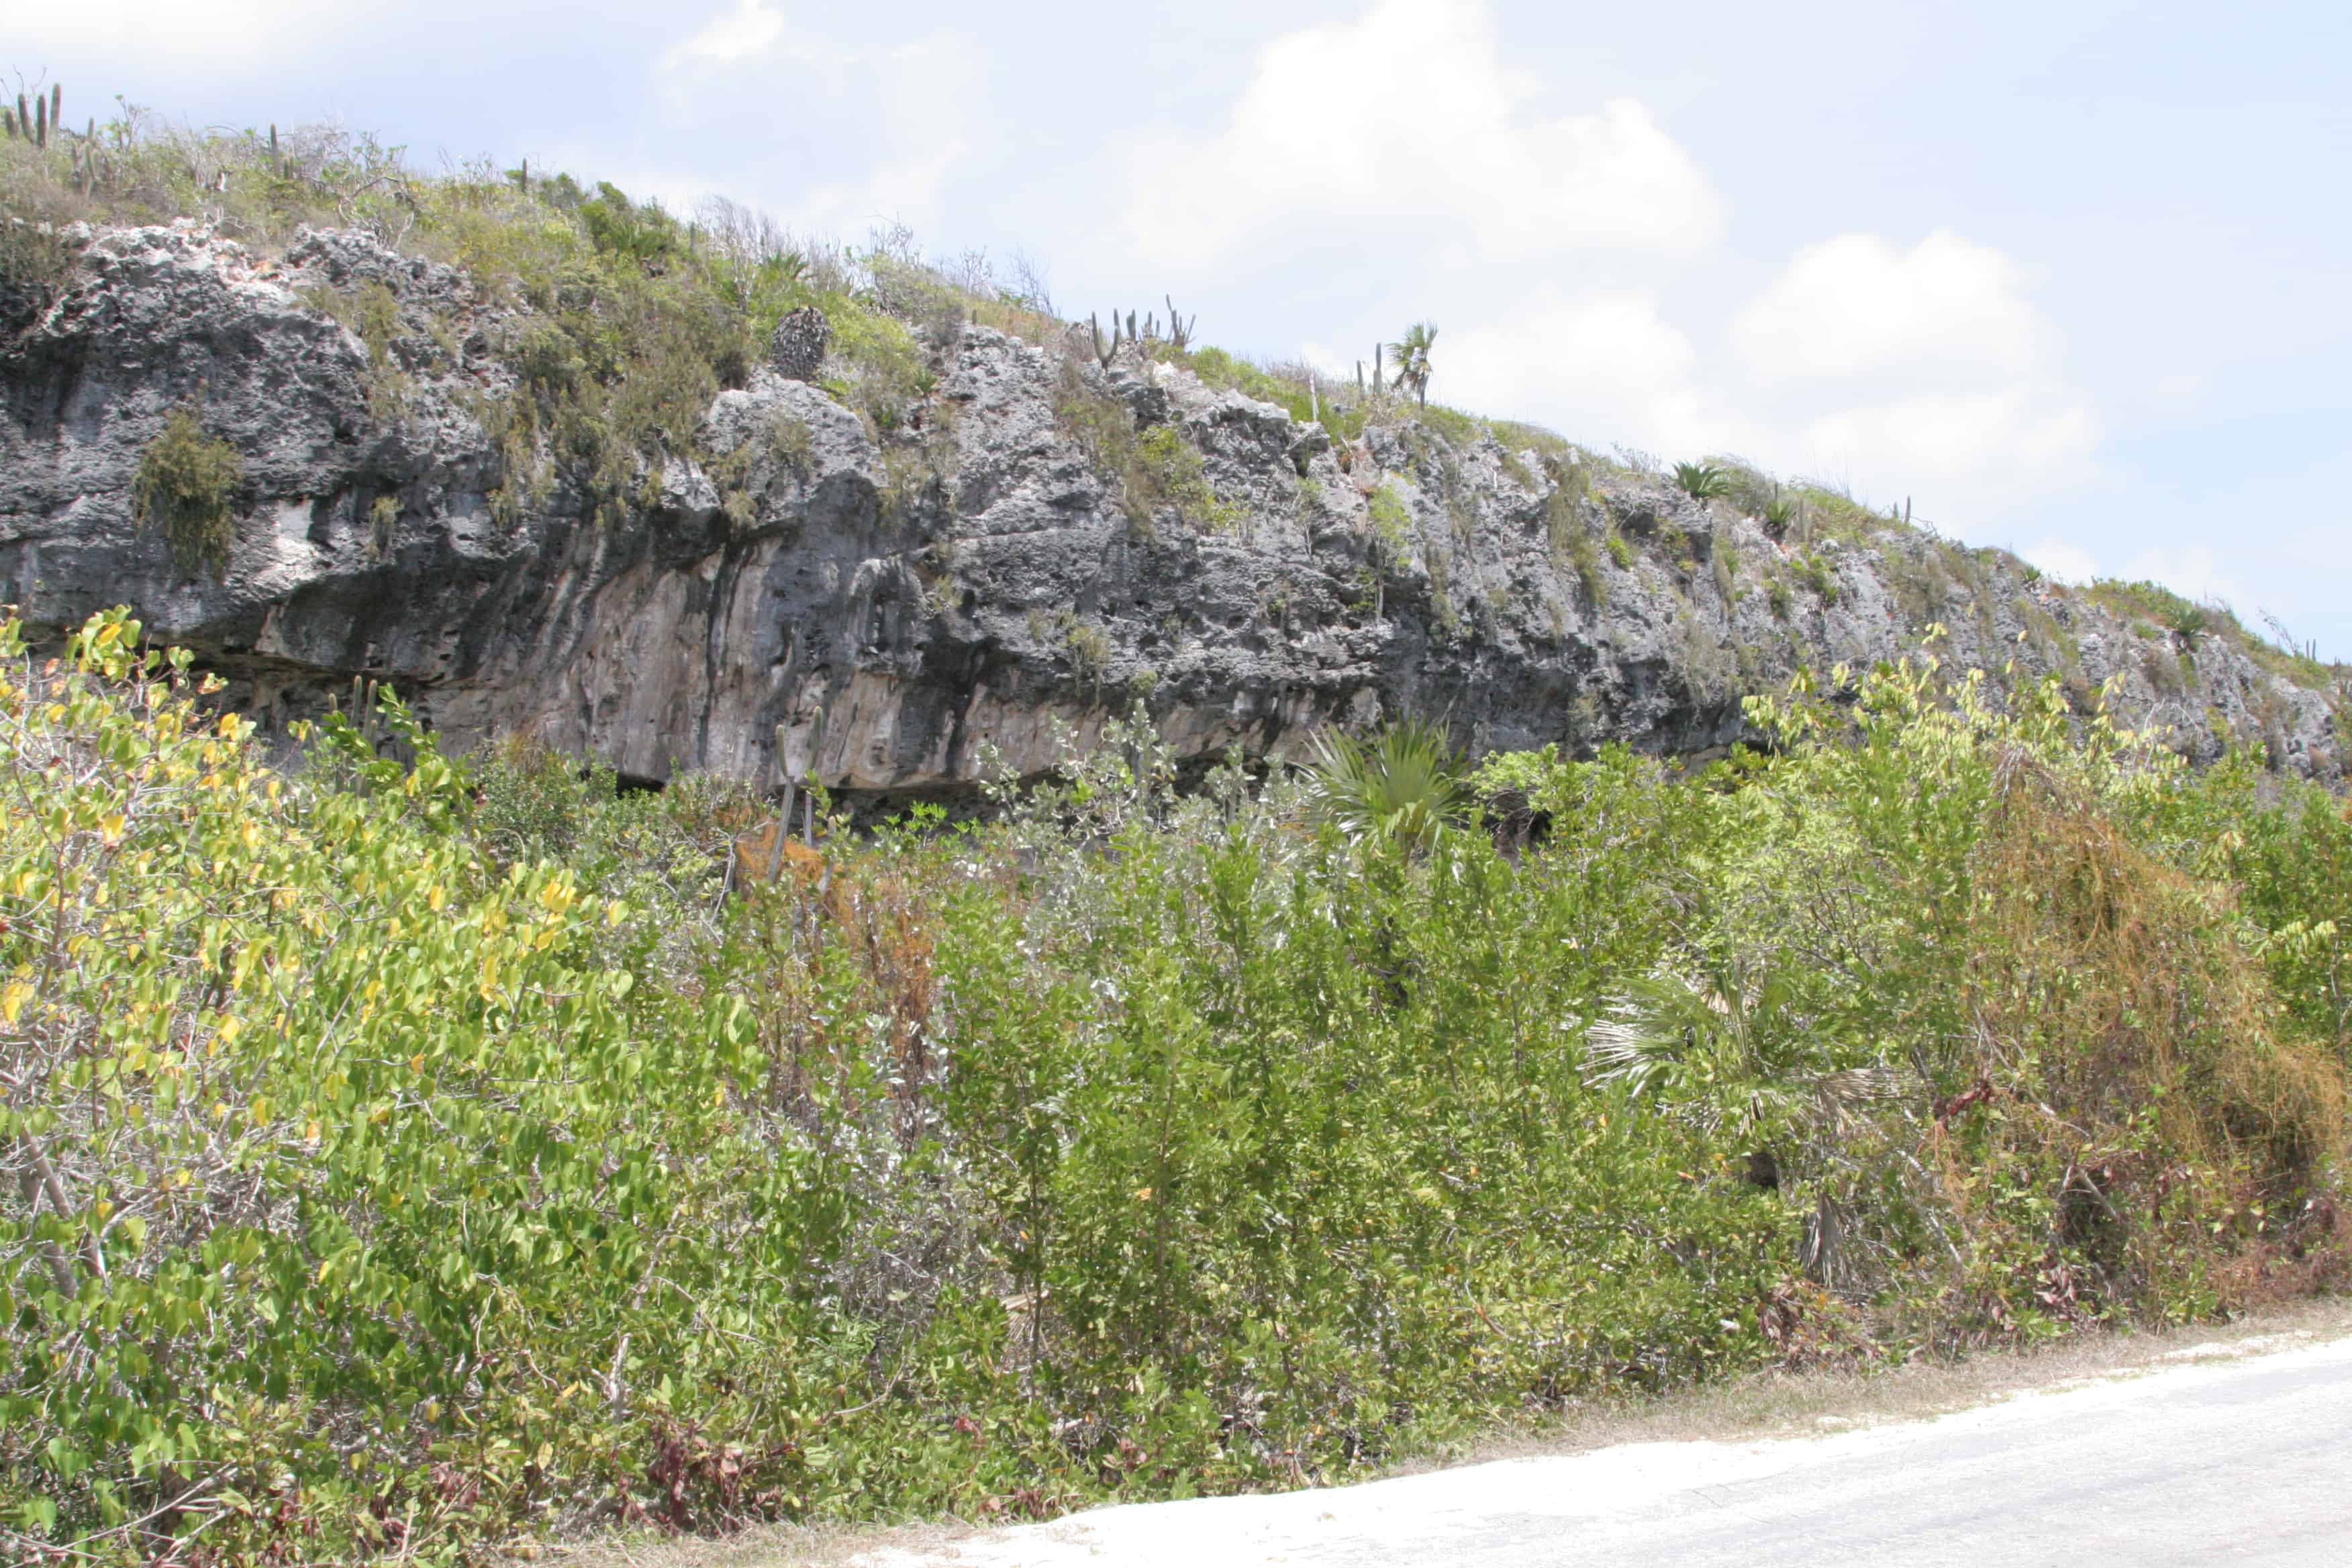 The Bluff from the shore level, Cayman Brac.